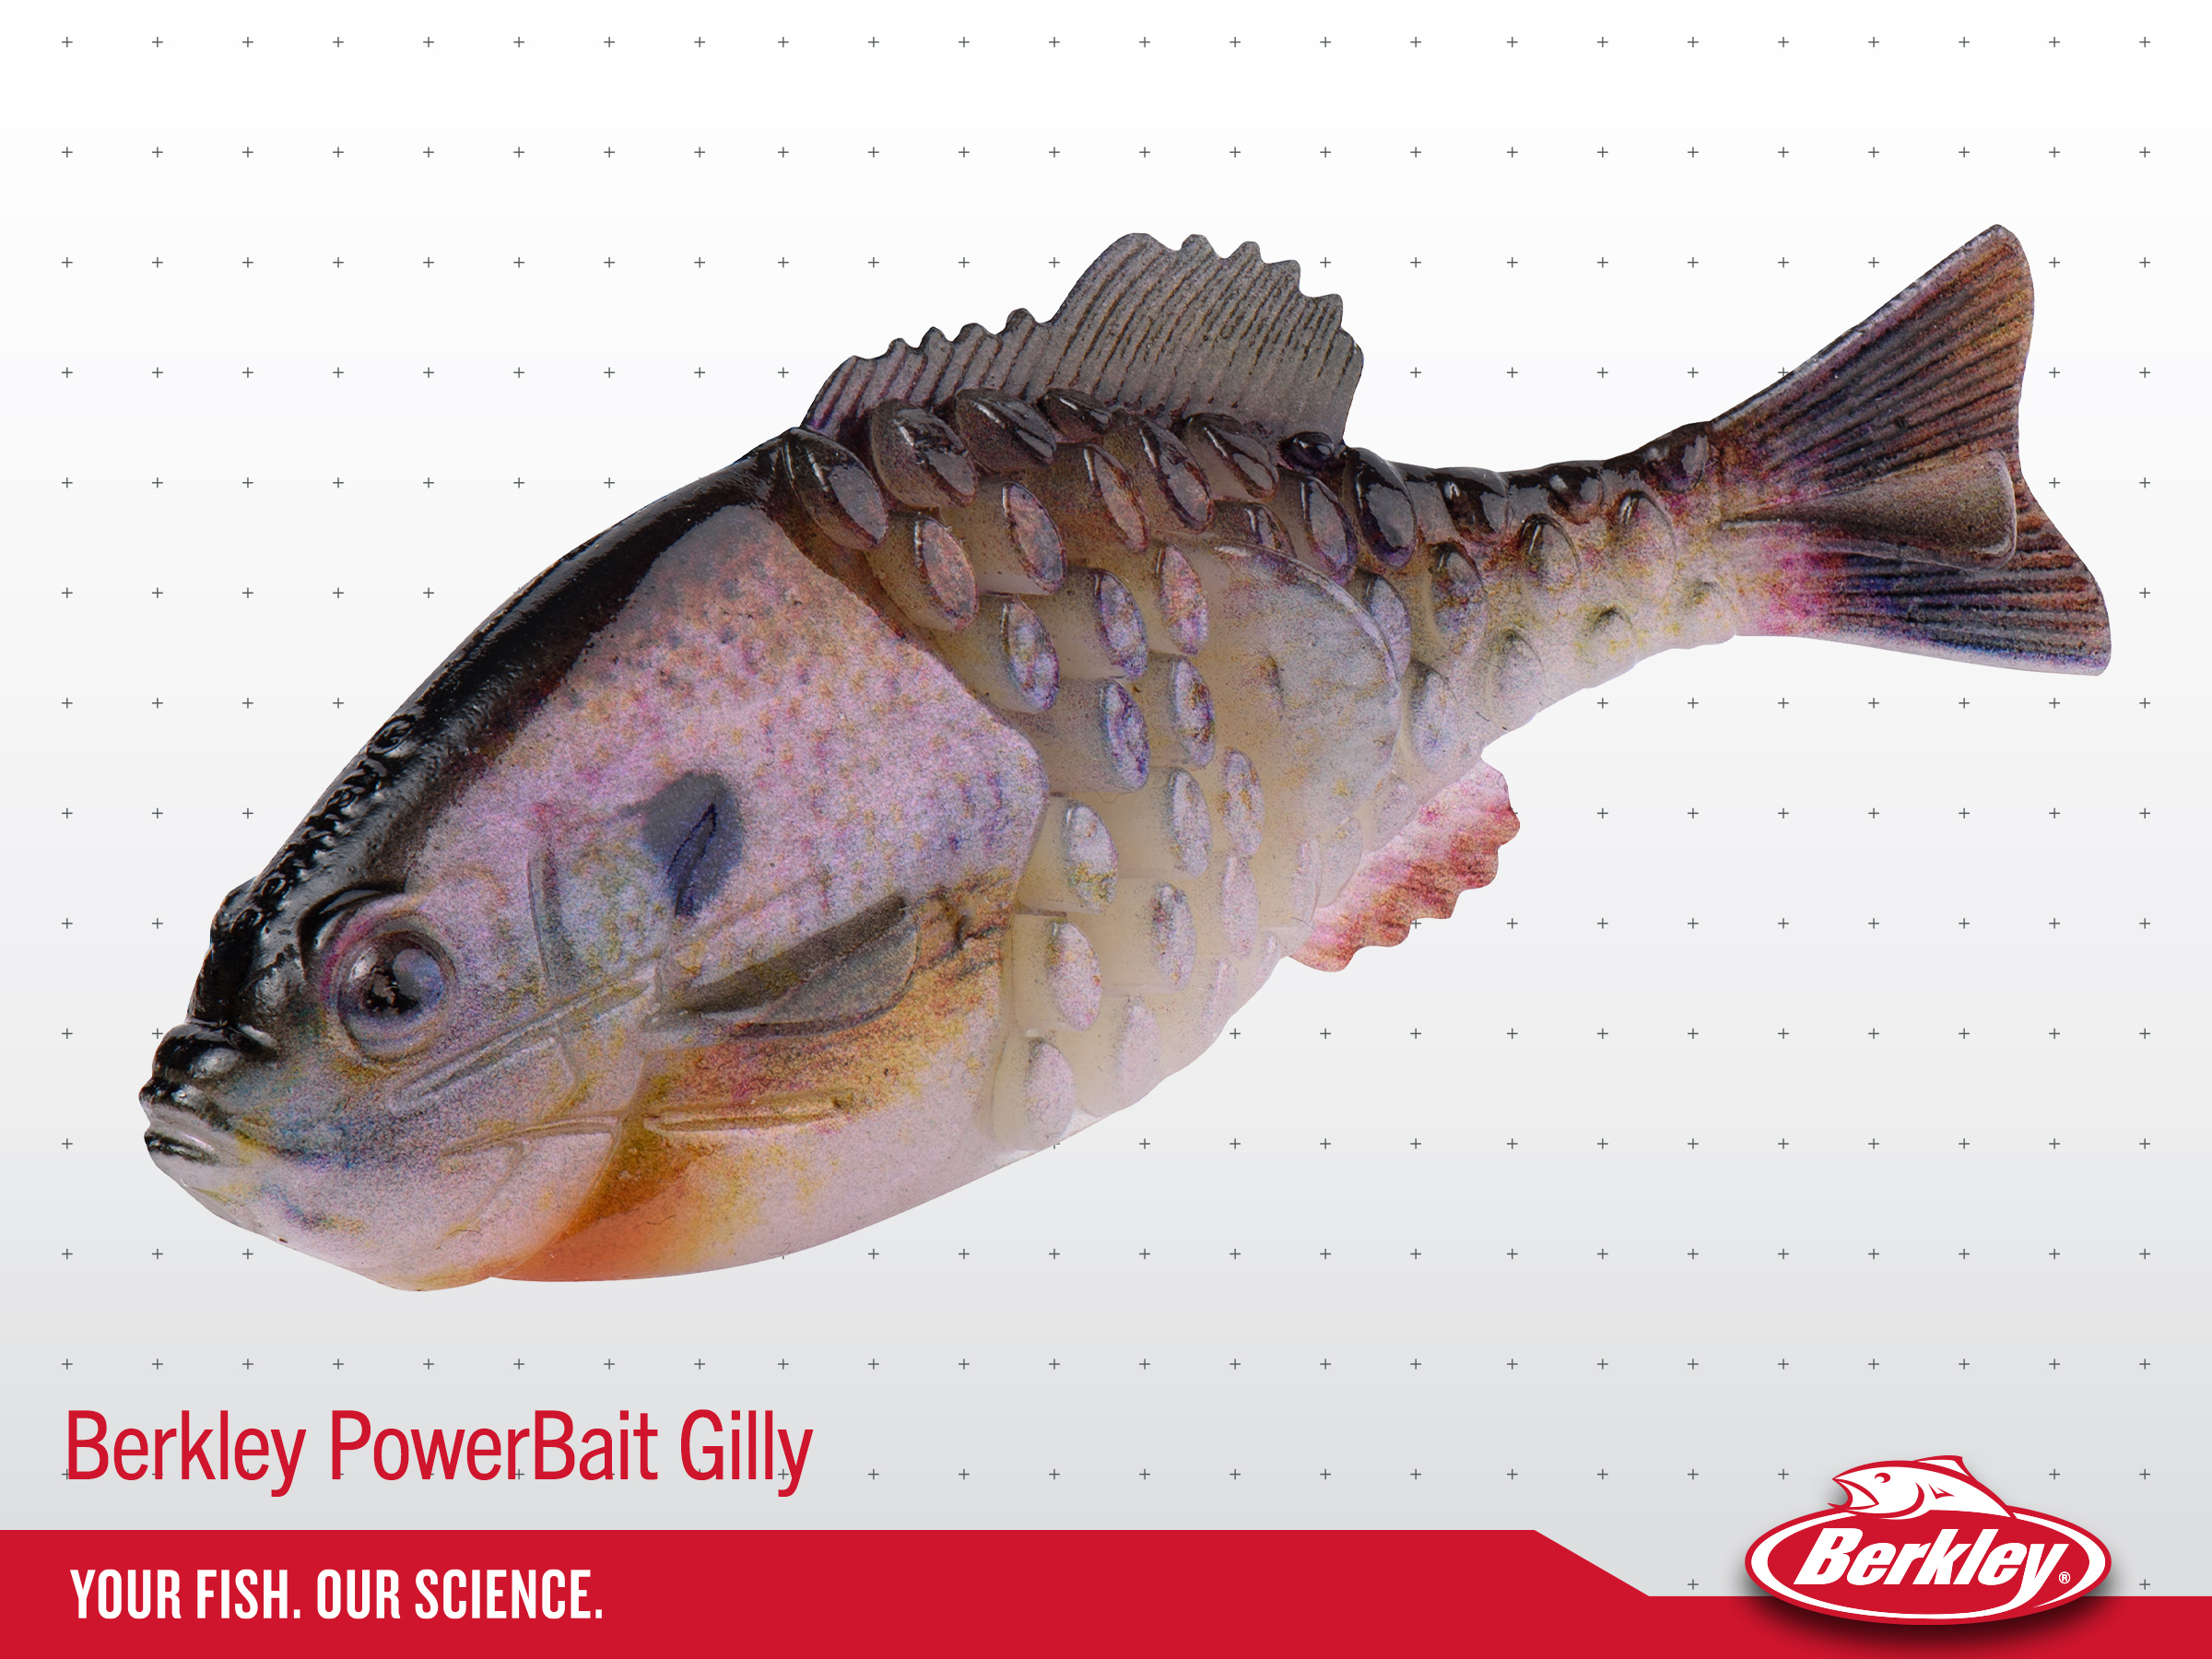 Berkley PowerBait Gilly Wins Best of Show at 2021 ICAST